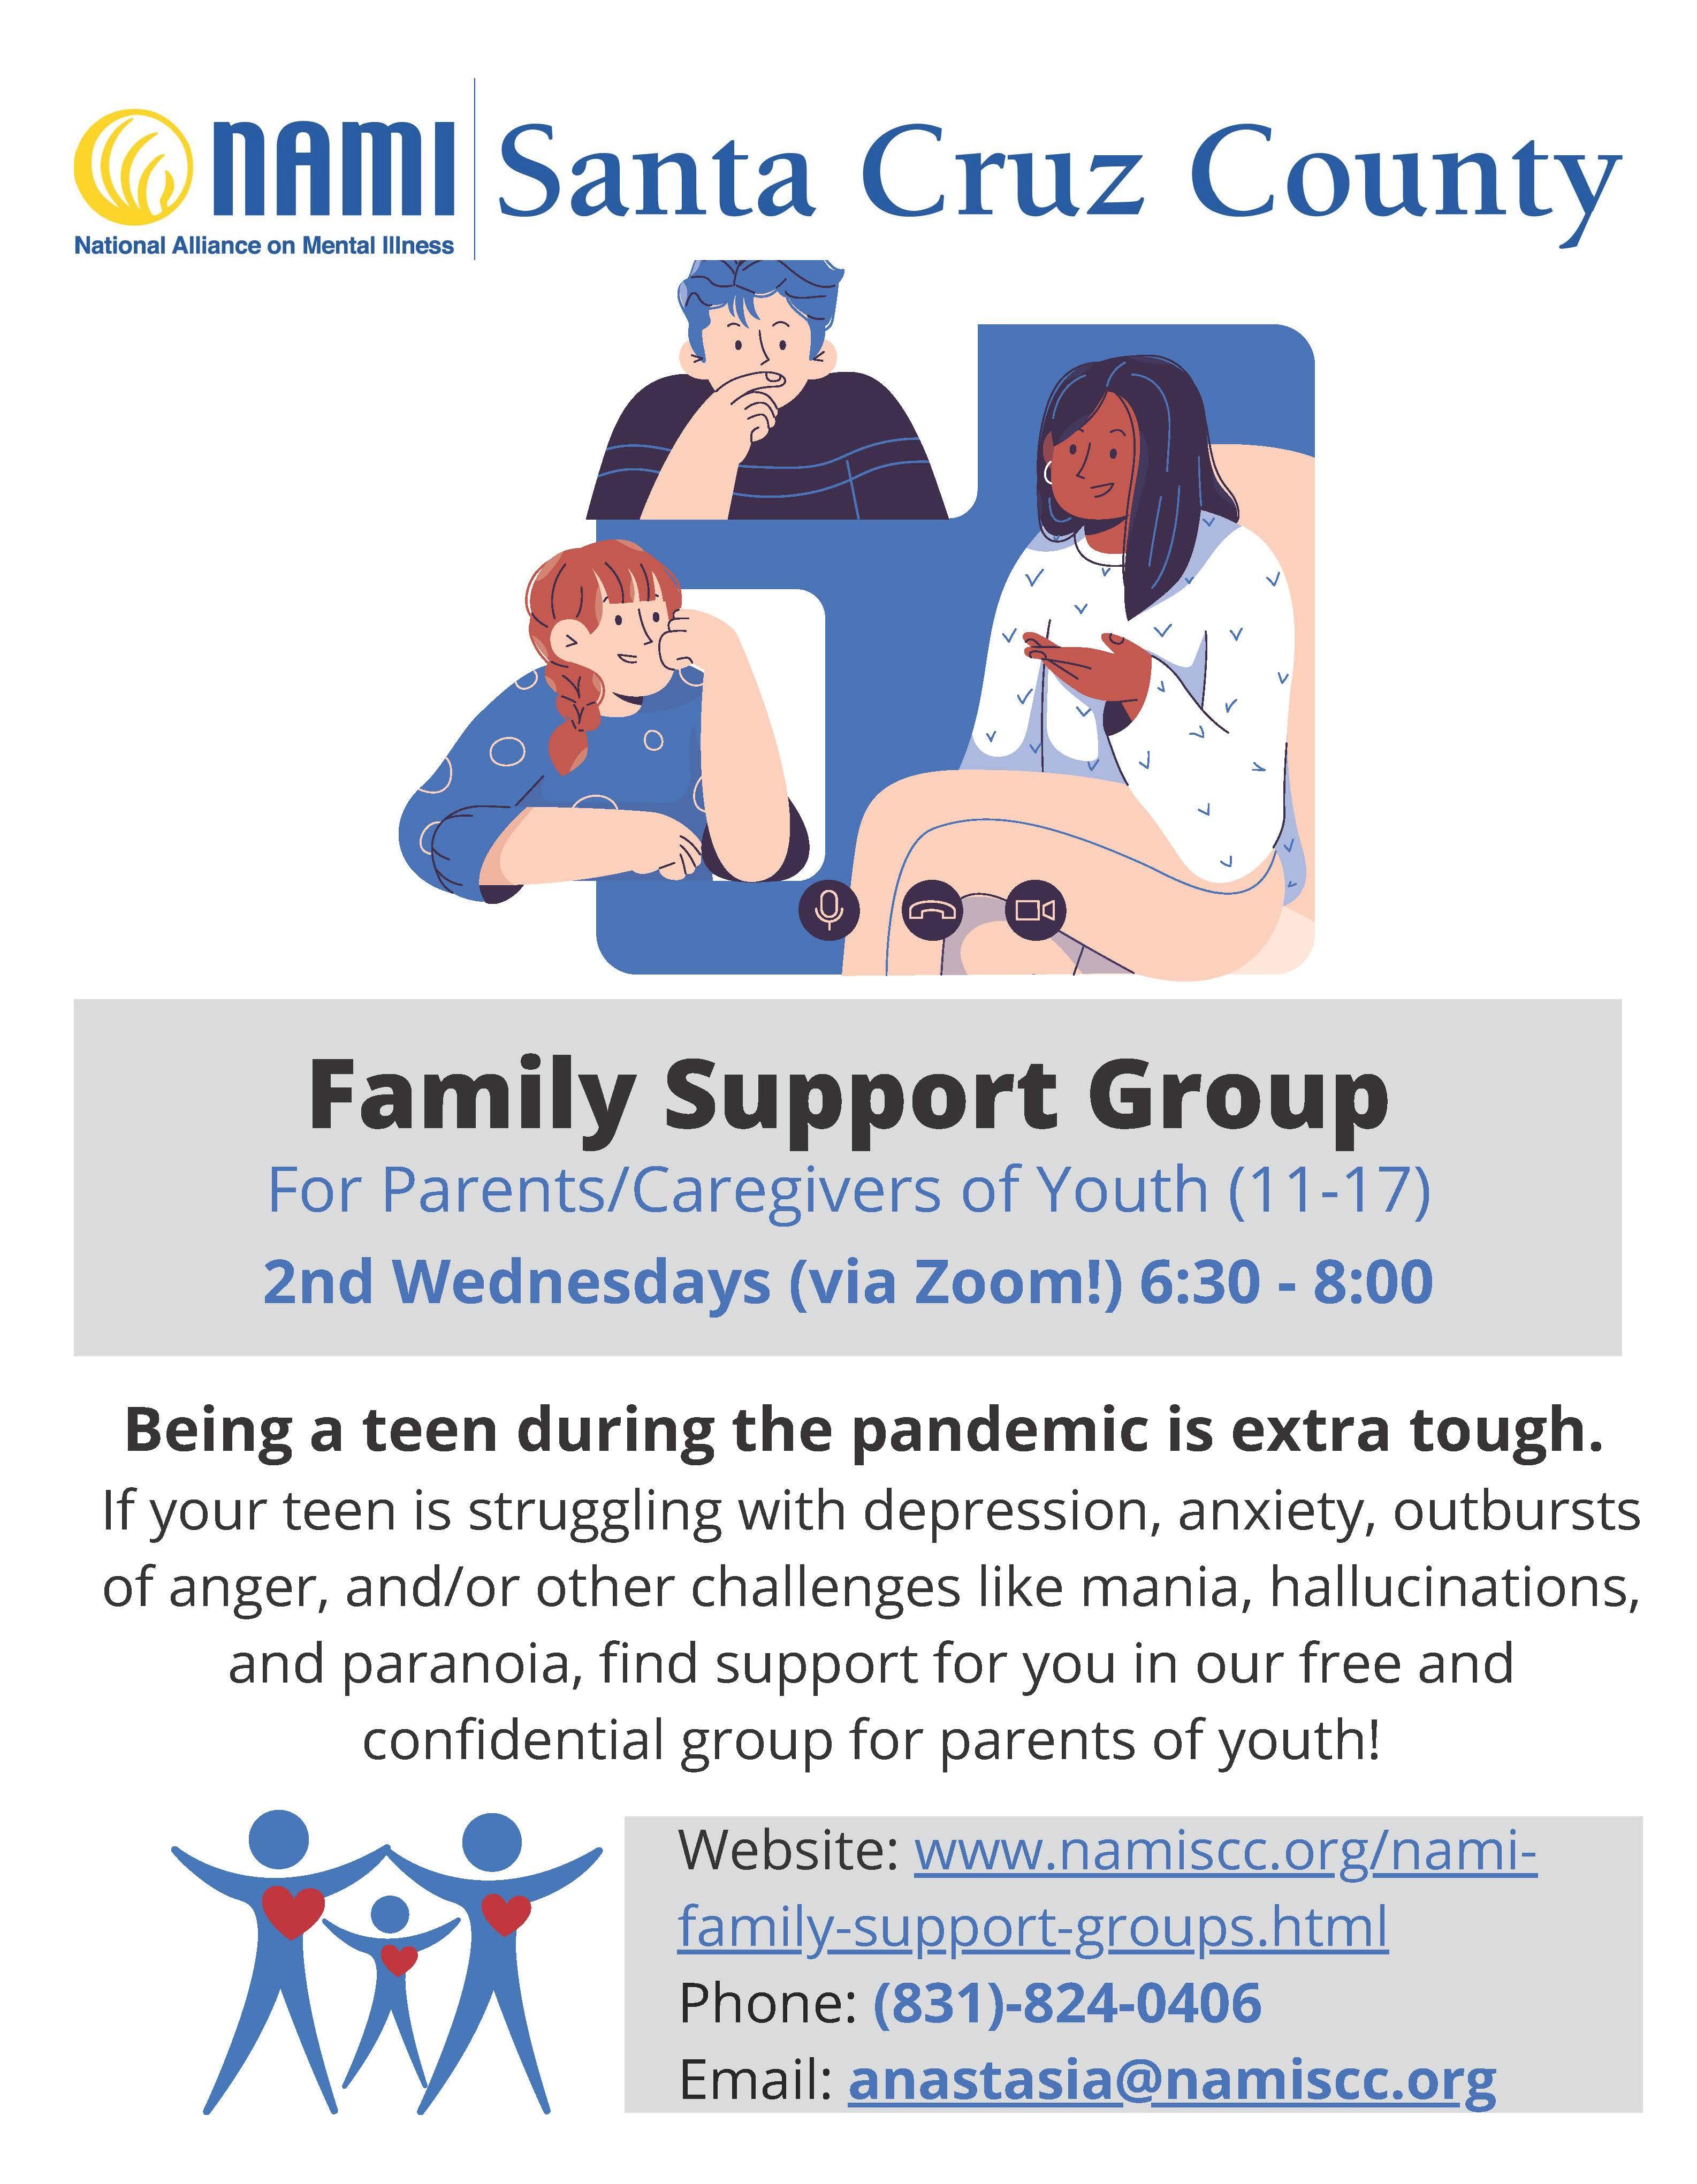 Family Support Group; Call 831-824-0406 for info